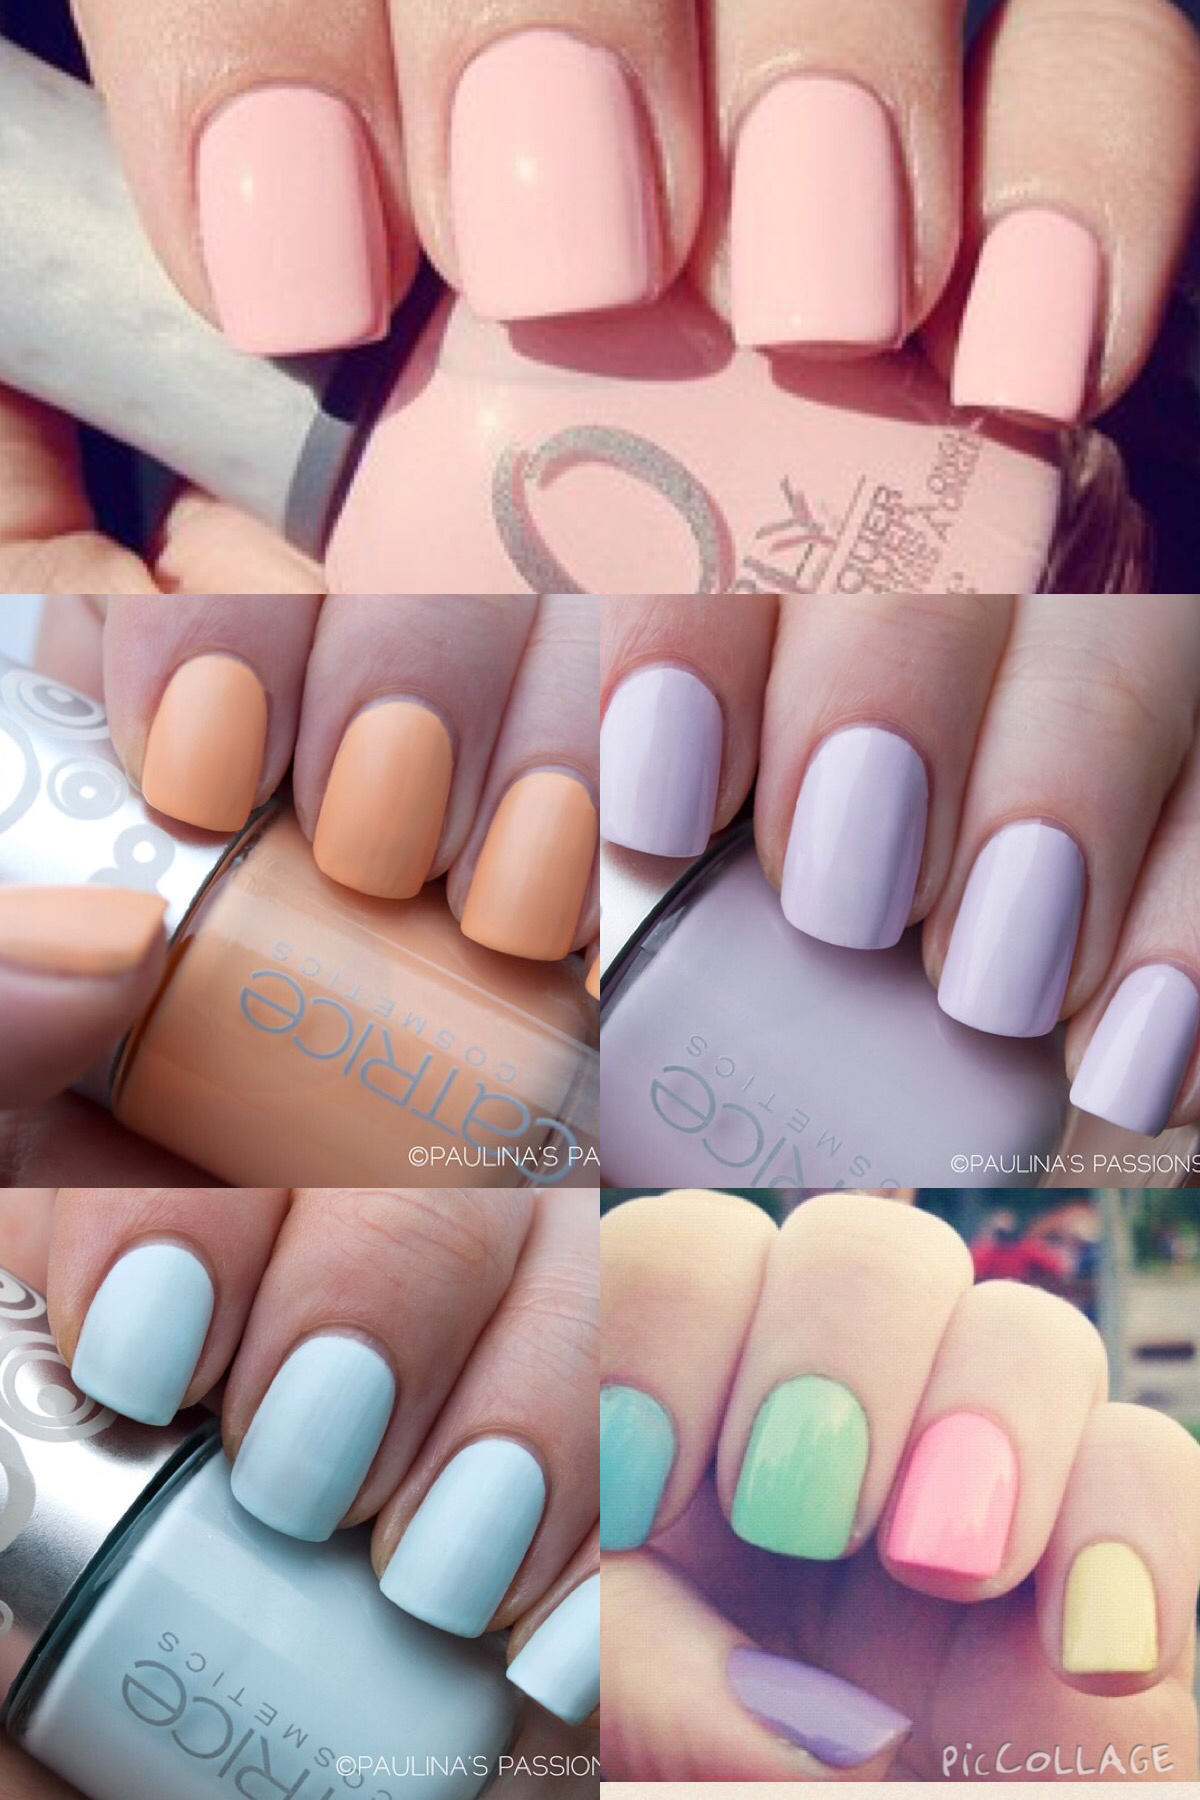 Most Popular Nail Polish Color Trends 2020 for Spring Summer ...